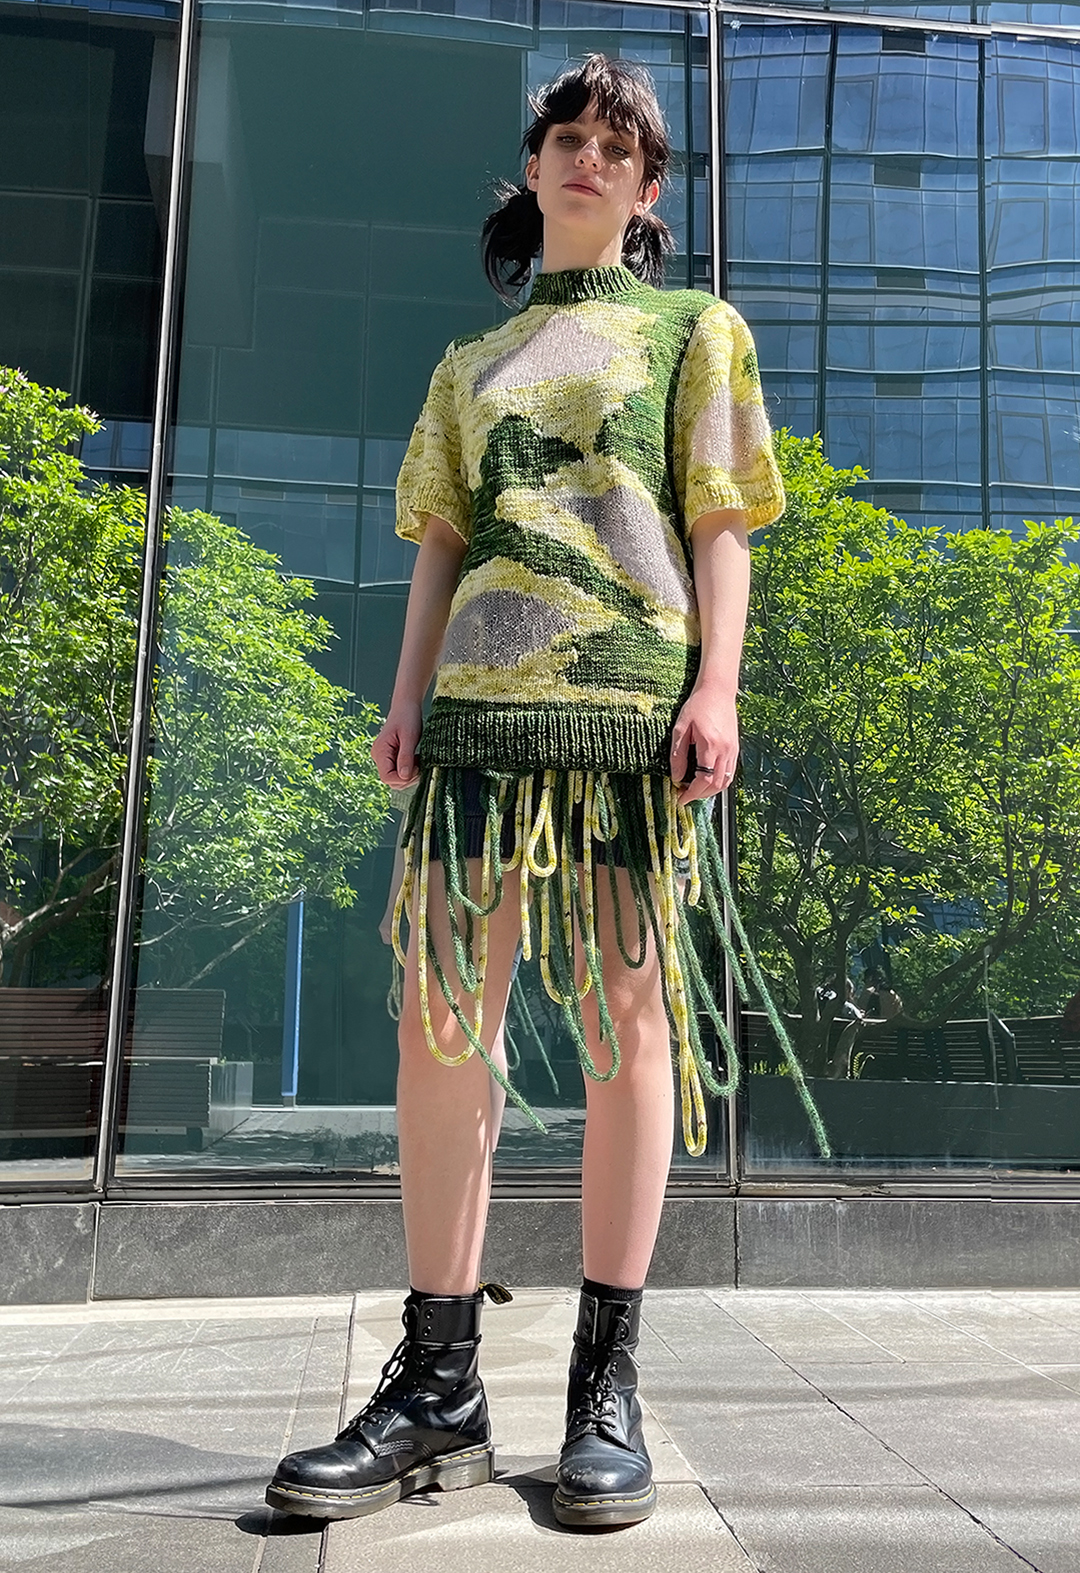 Front view of a model wearing a hand knit short sleeved intarsia sweater with transparent mohair windows. She is also wearing combat boots. There is a glass building in the background with reflection of trees.